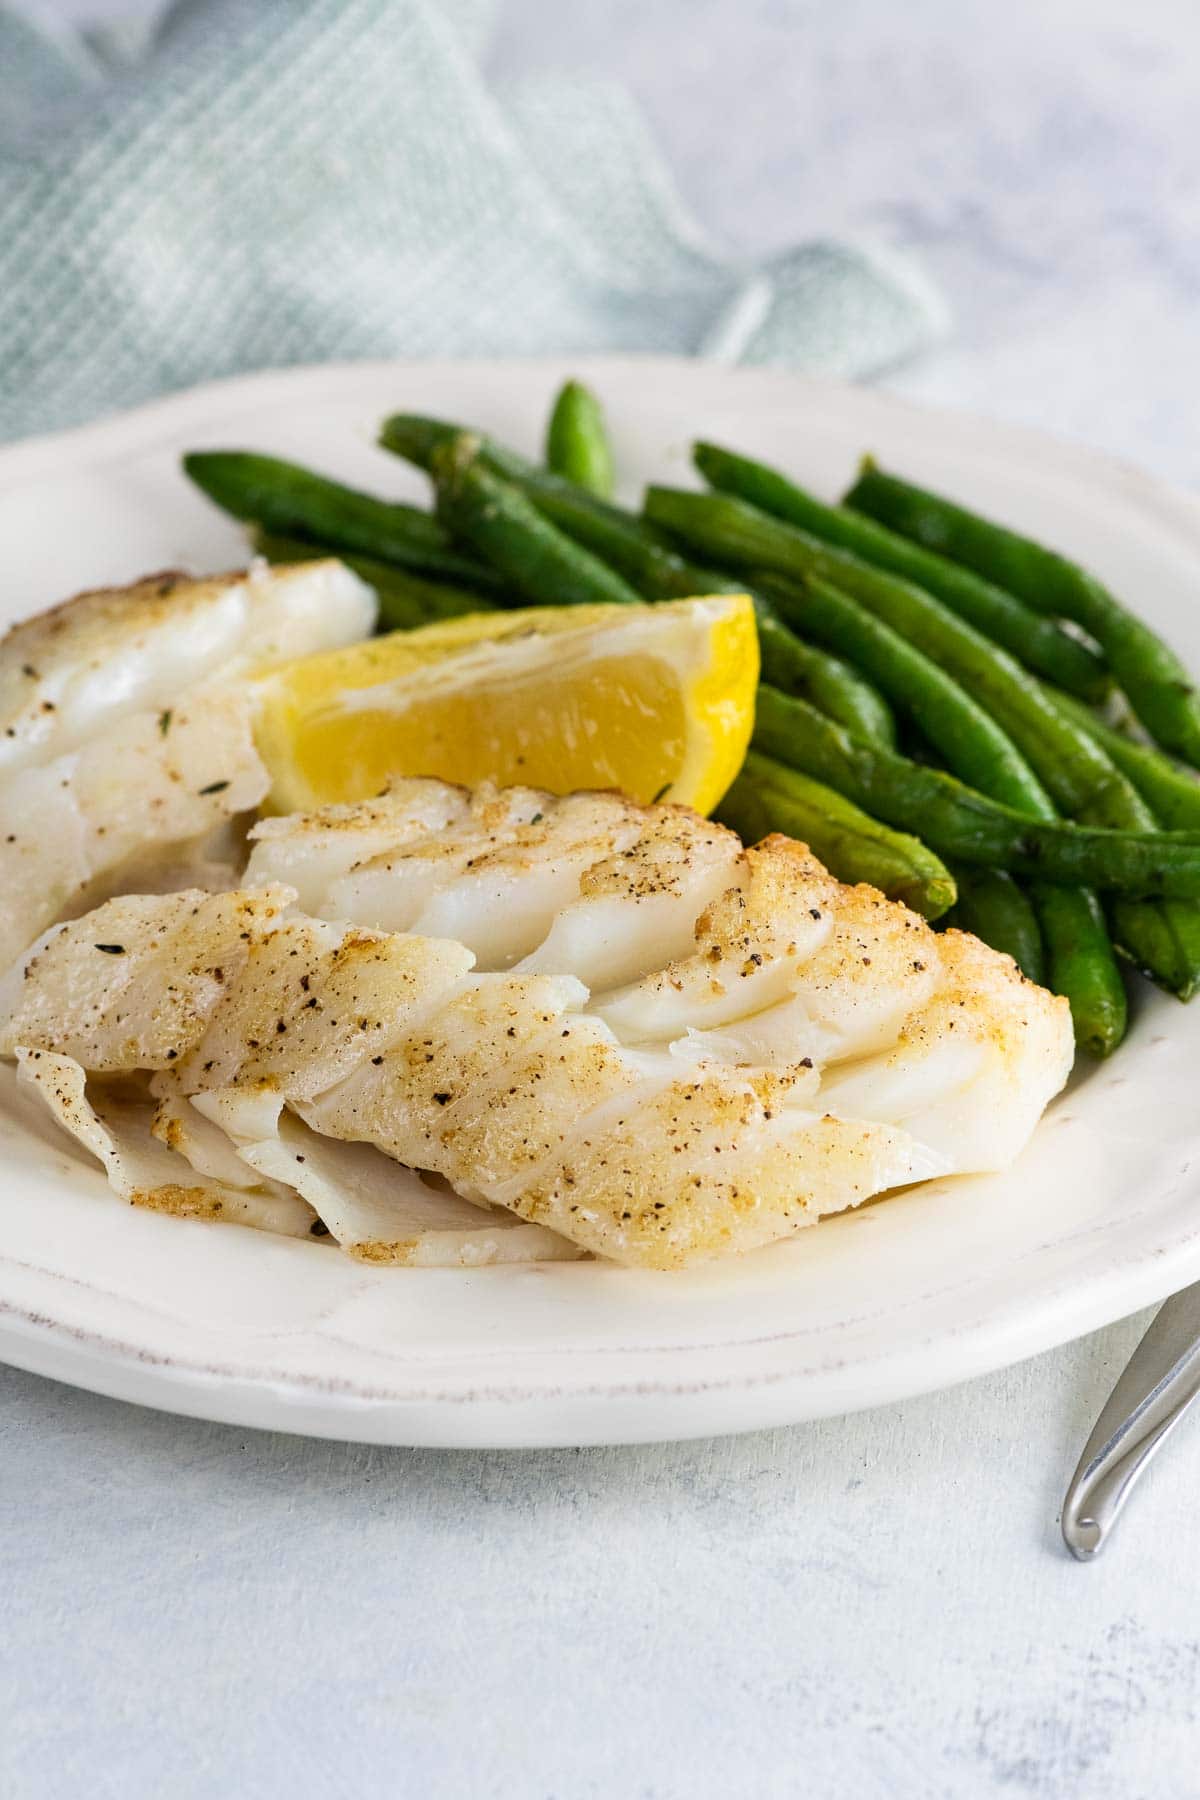 pan fried cod with green beans and a and lemon wedge on a plate